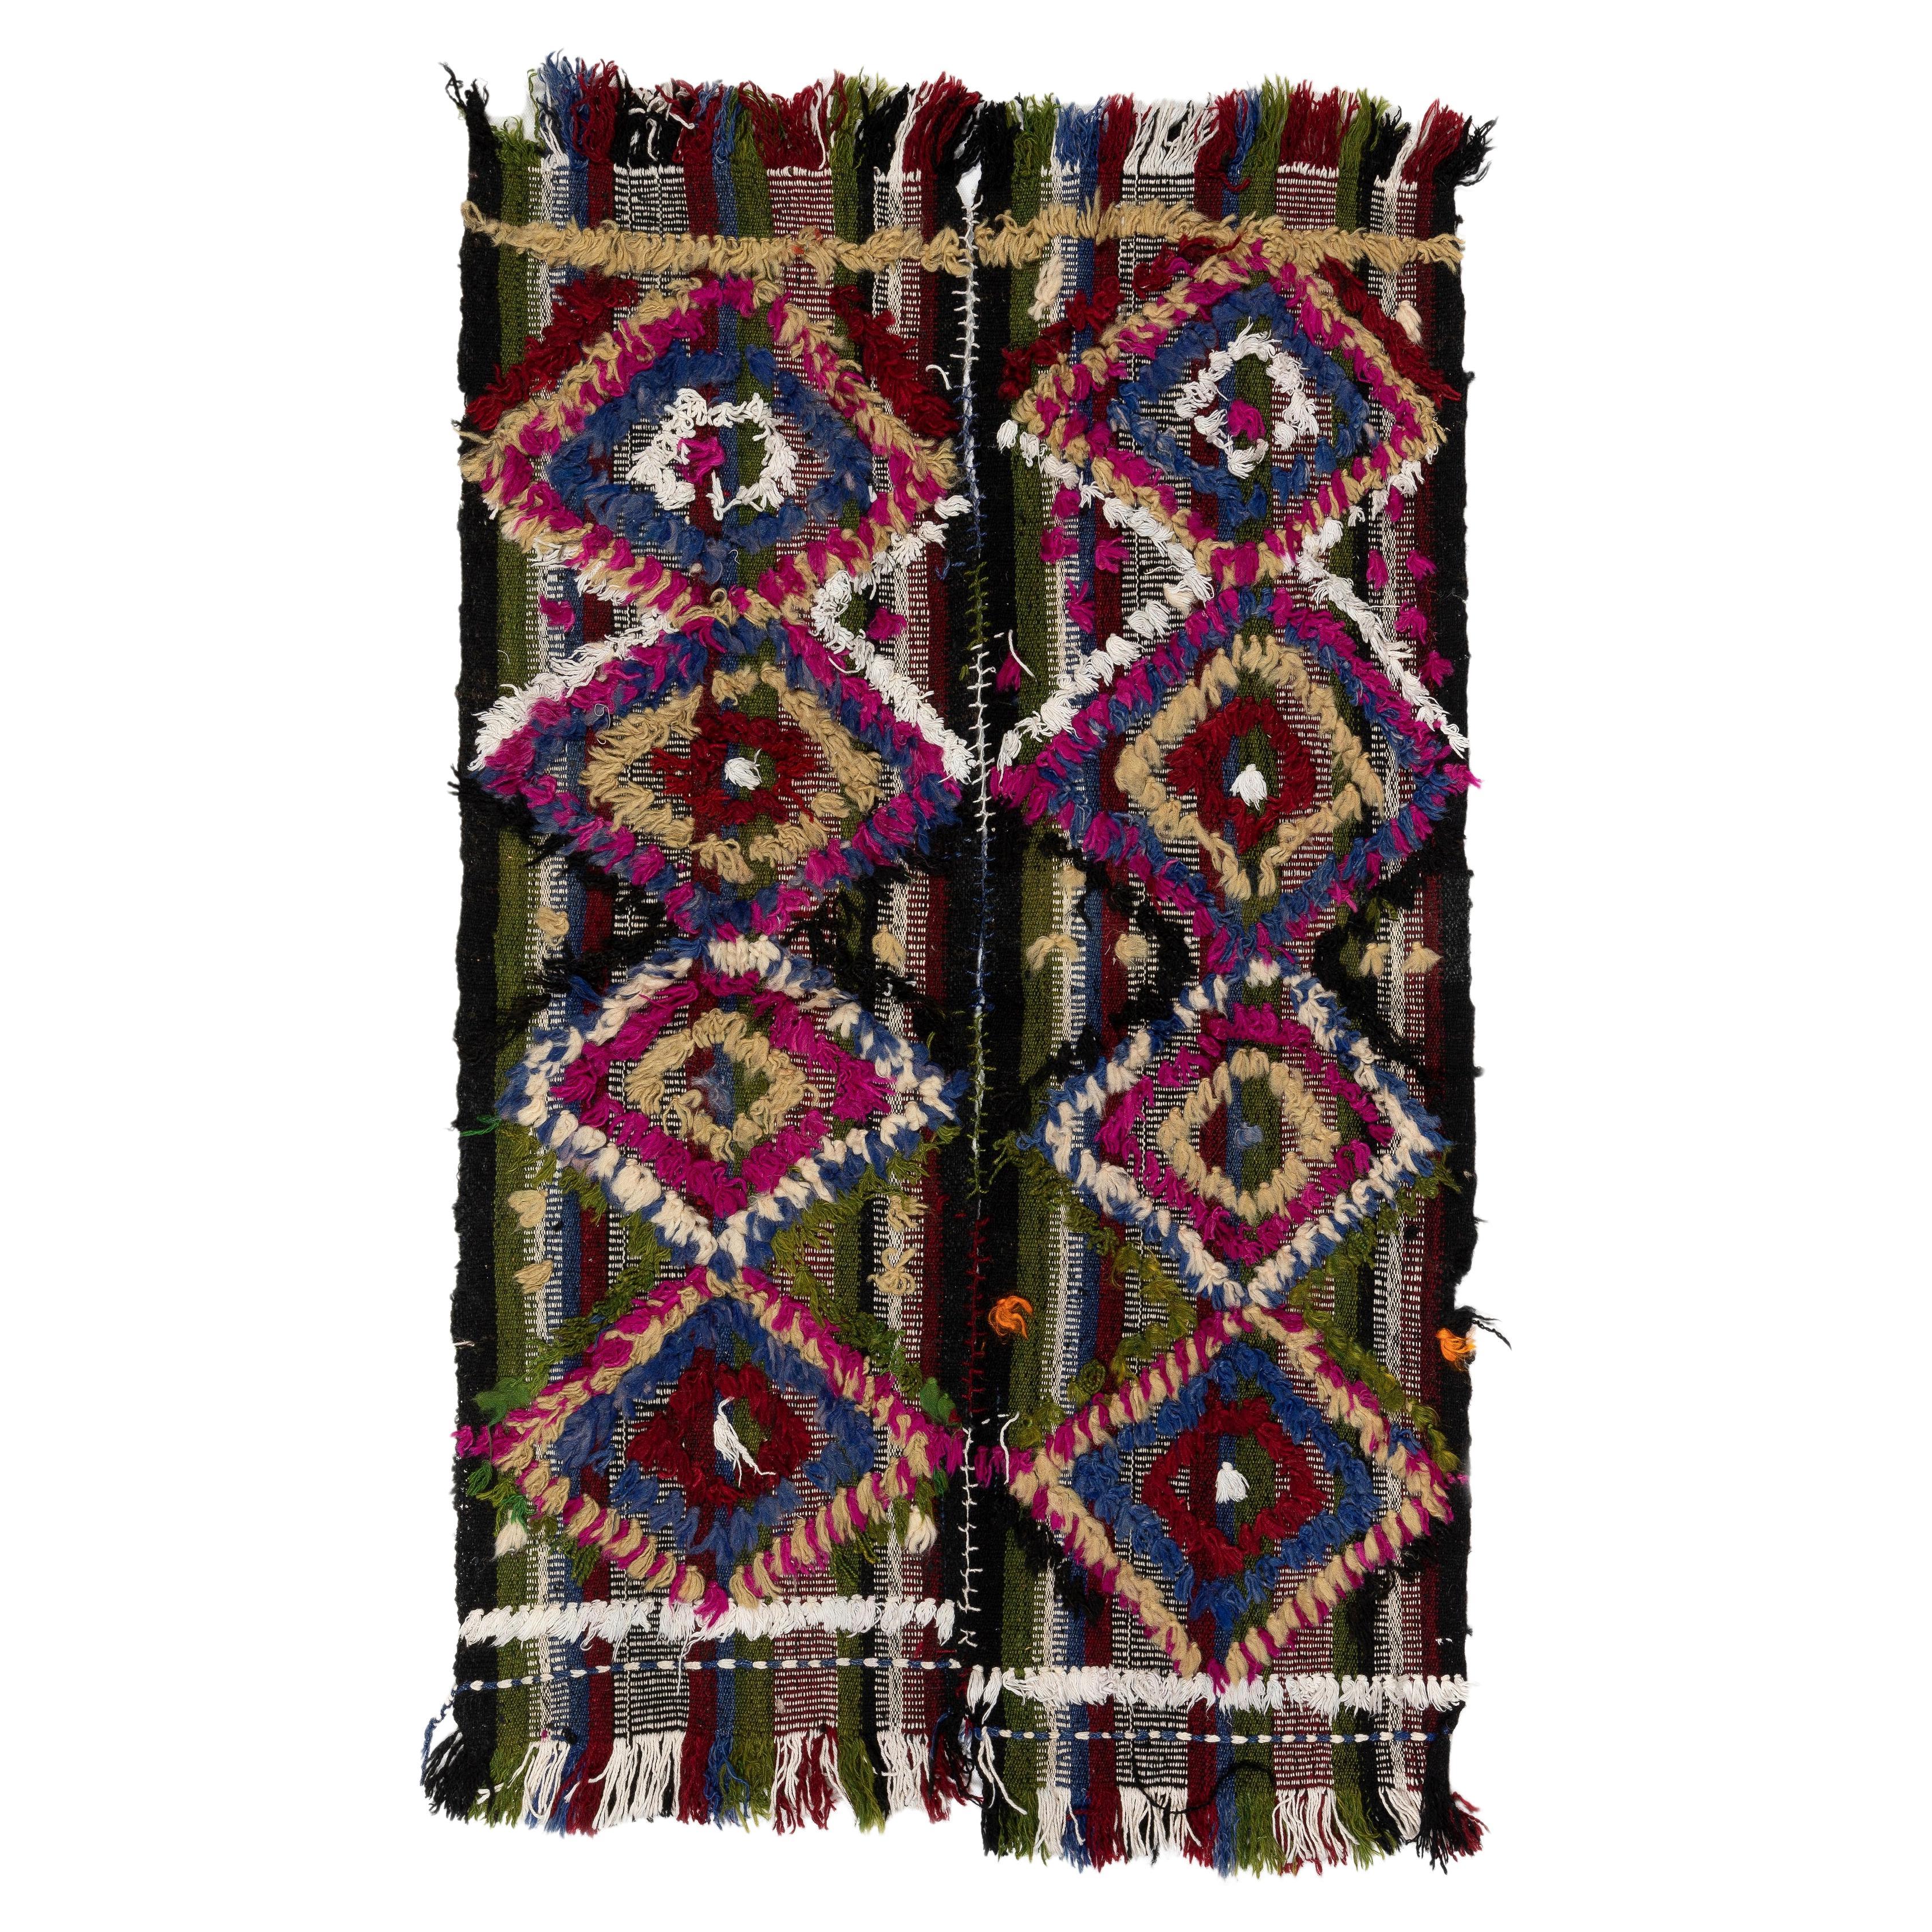 3x3.8 Ft Hand-Made Anatolian Kilim Rug with Colorful Poms, Great for Kids Room